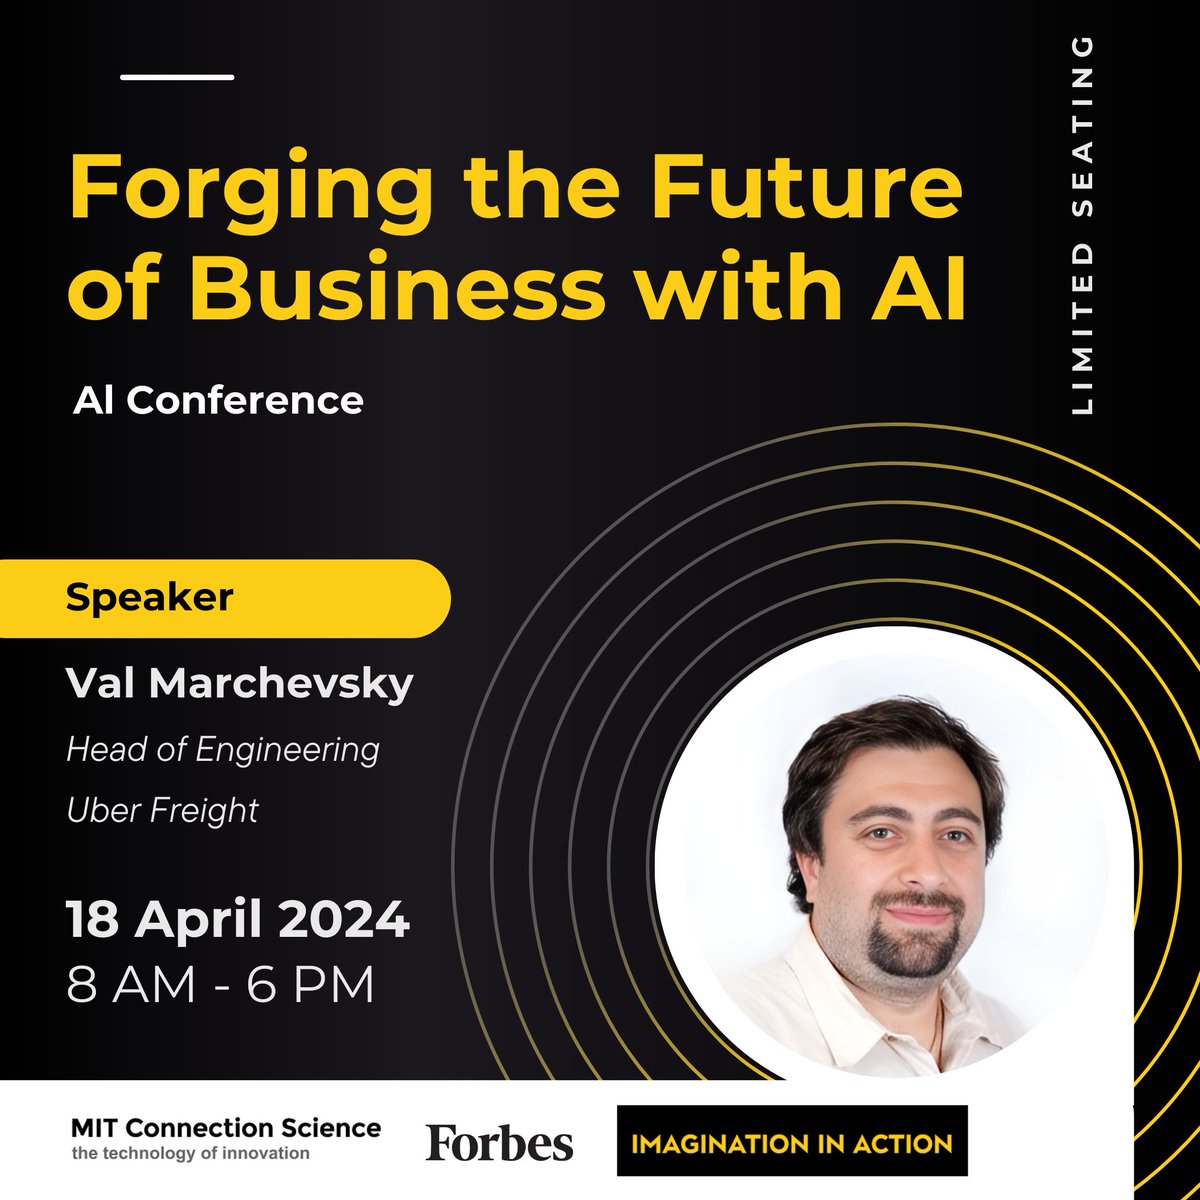 Pleased to have Val Marchevsky, Head of Engineering at Uber Freight, as a distinguished speaker at the Imagination in Action Summit at MIT! Expect insightful discussions on AI-driven innovation in the logistics industry. #MITforge2024